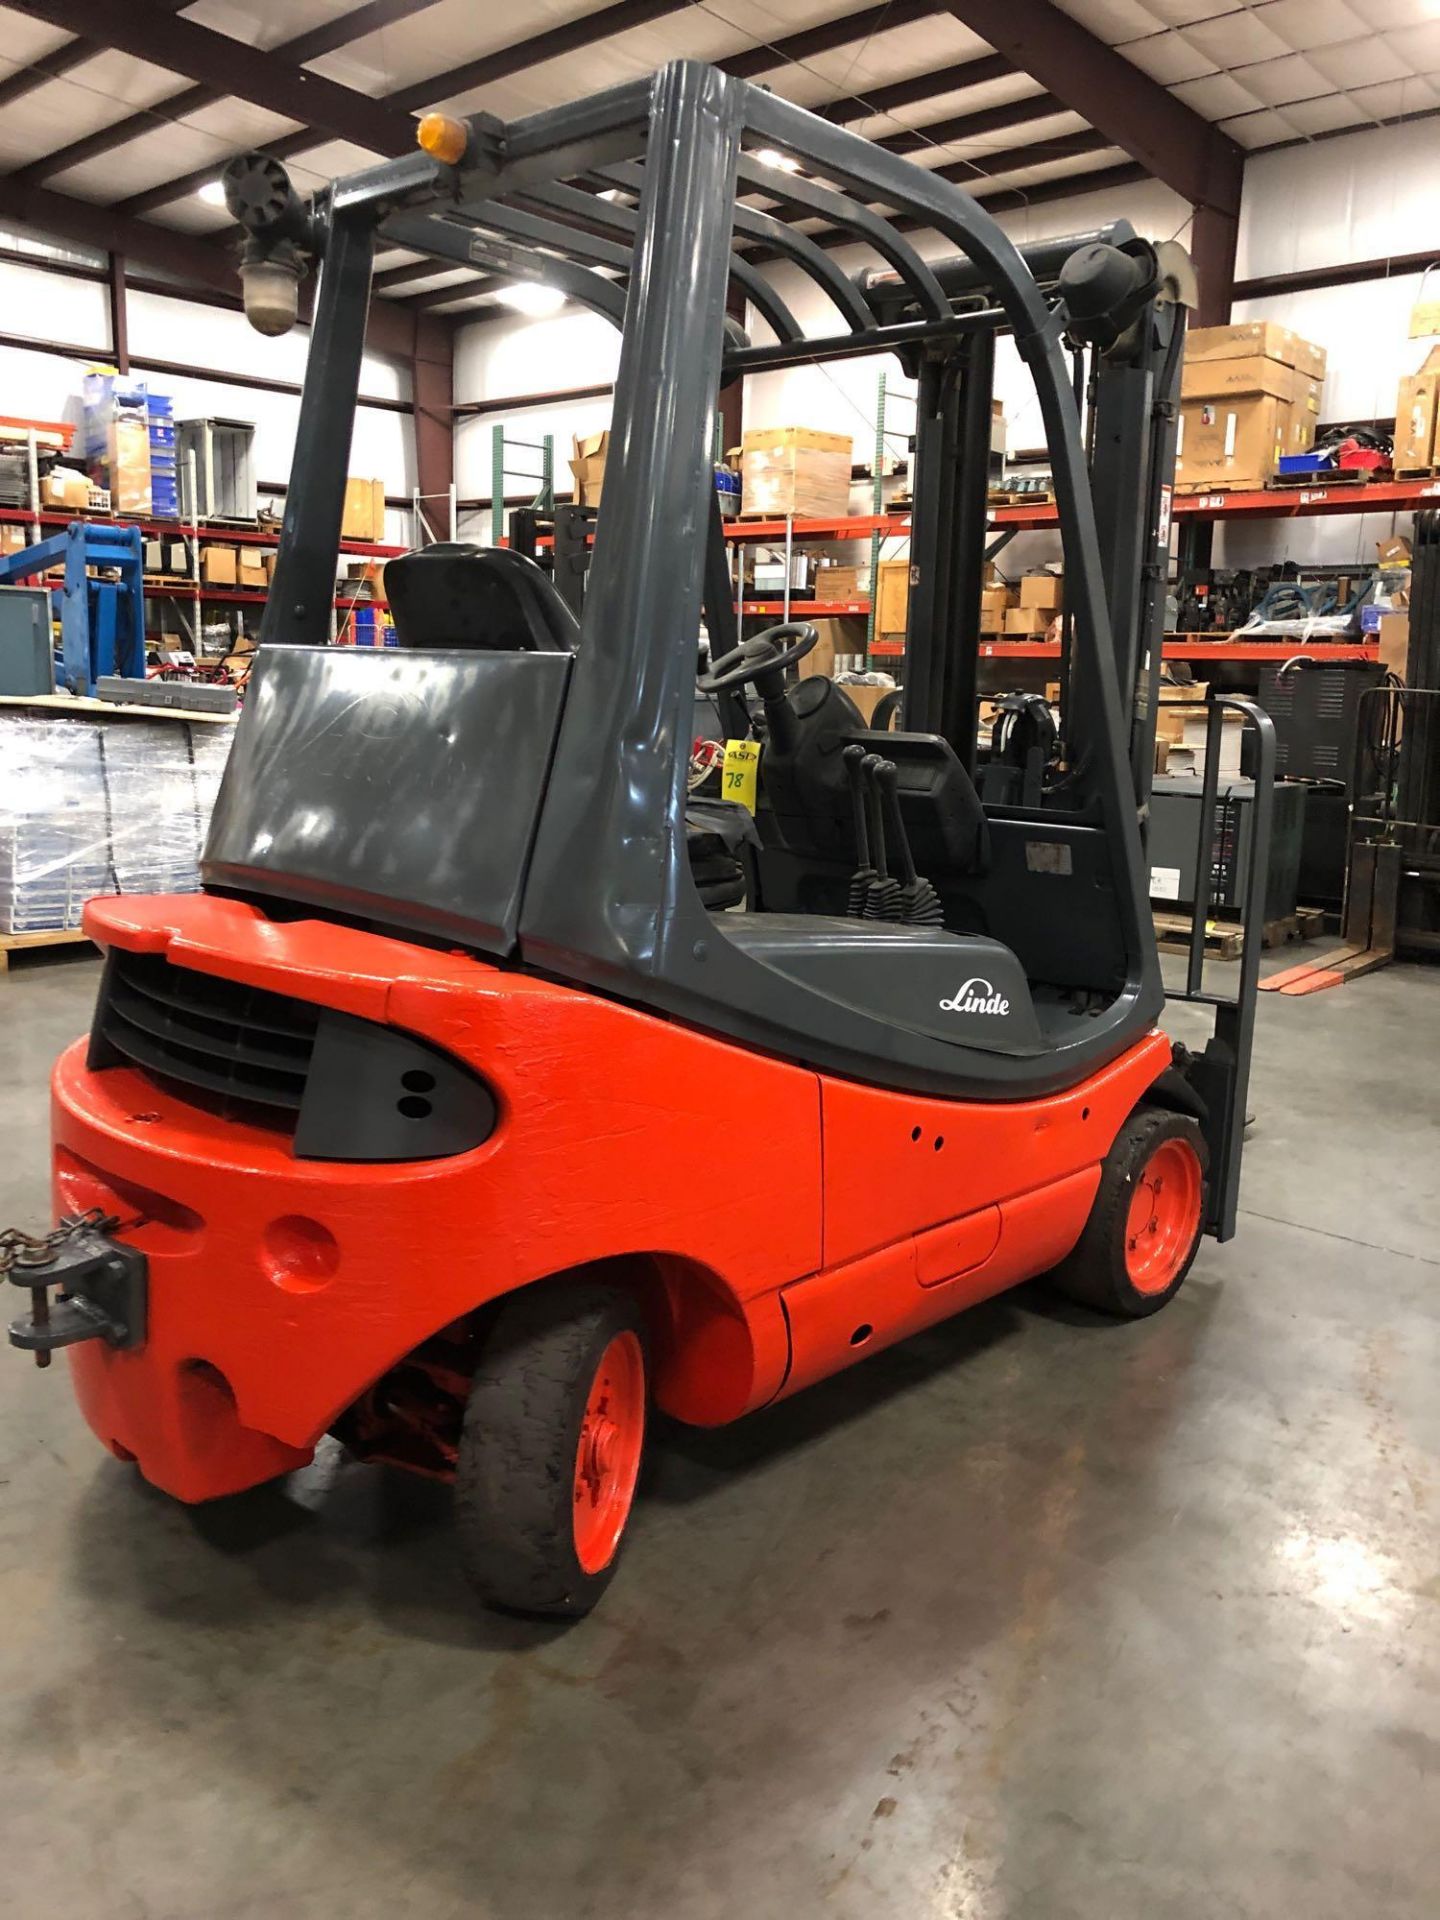 LINDE DIESEL FORKLIFT MODEL H20CD, 4,500 LB CAPACITY, 175" HEIGHT CAPACITY, TILT, RUNS AND OPERATES - Image 4 of 5